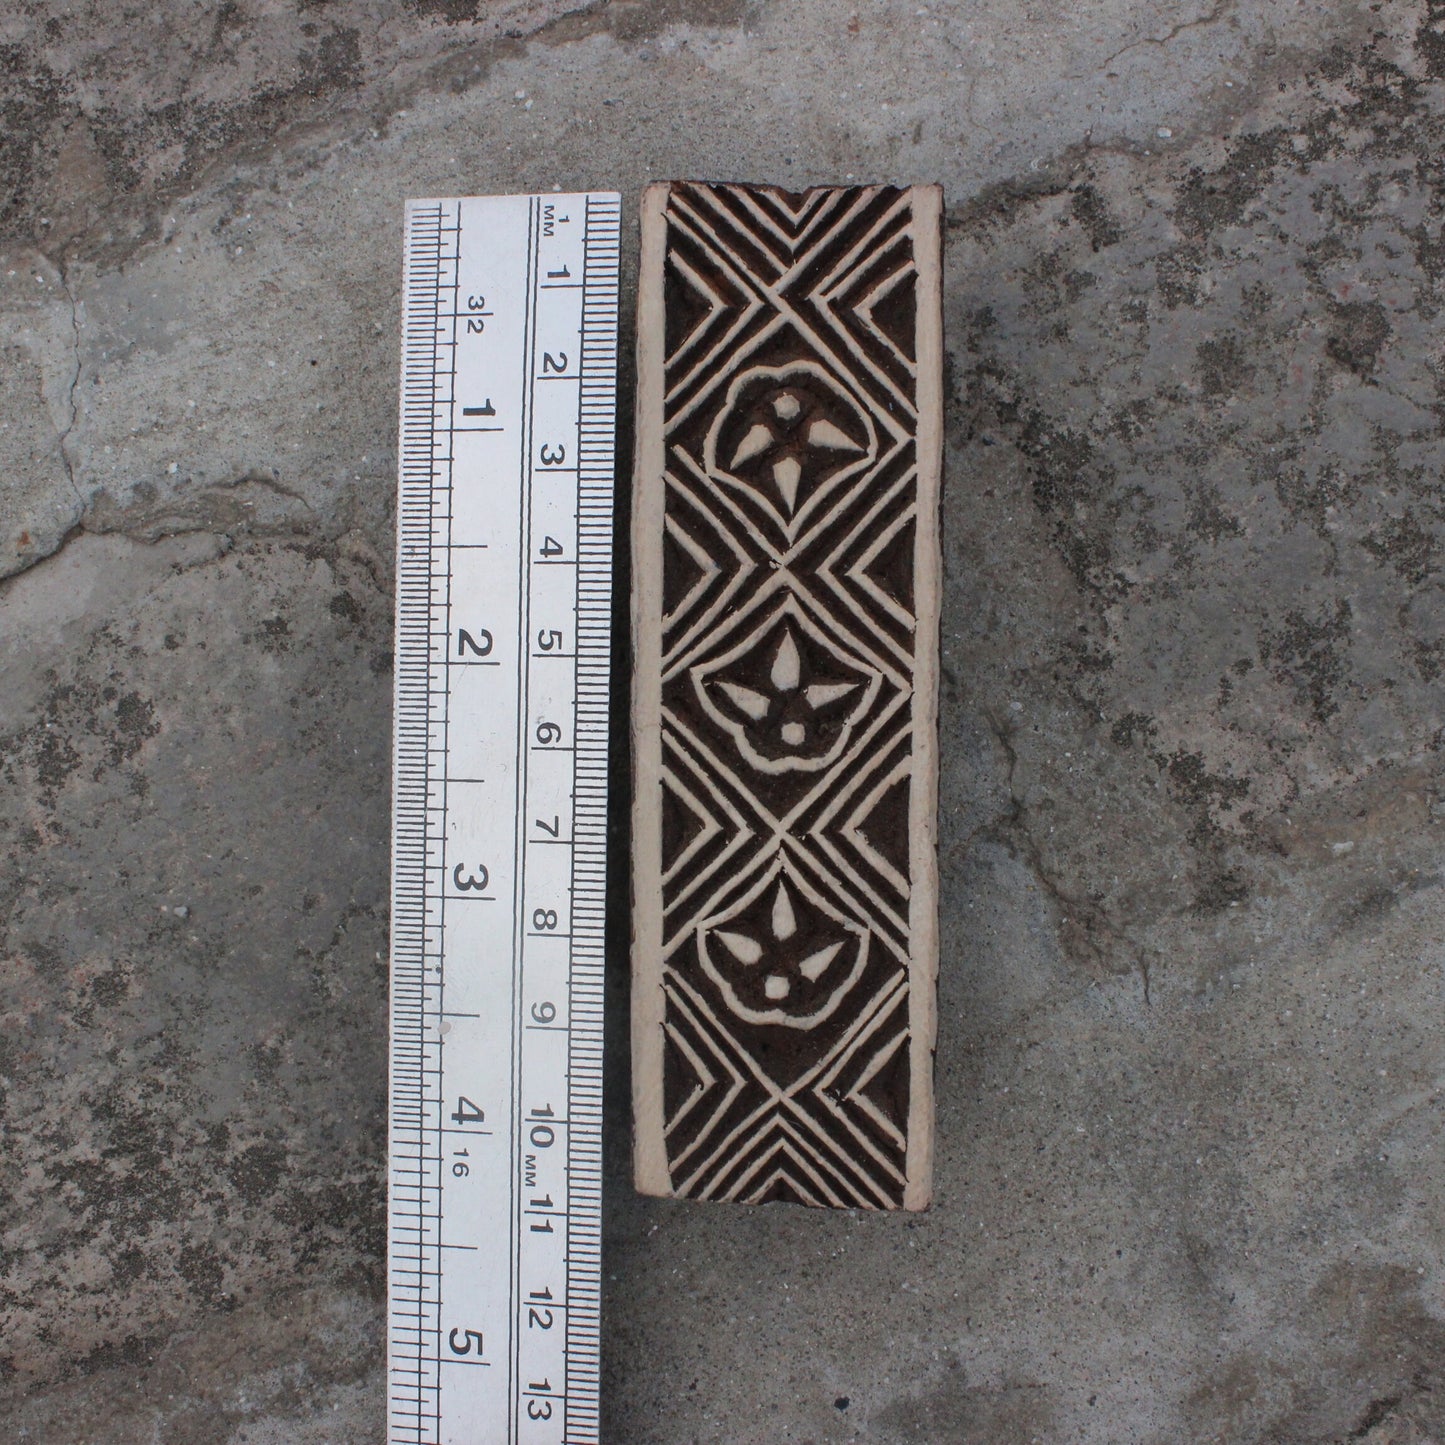 Floral Border Fabric Stamp Ethnic Border Wood Block Stamp Indian Fabric Stamp Carve Textile Block For Printing Traditional Soap Making Stamp